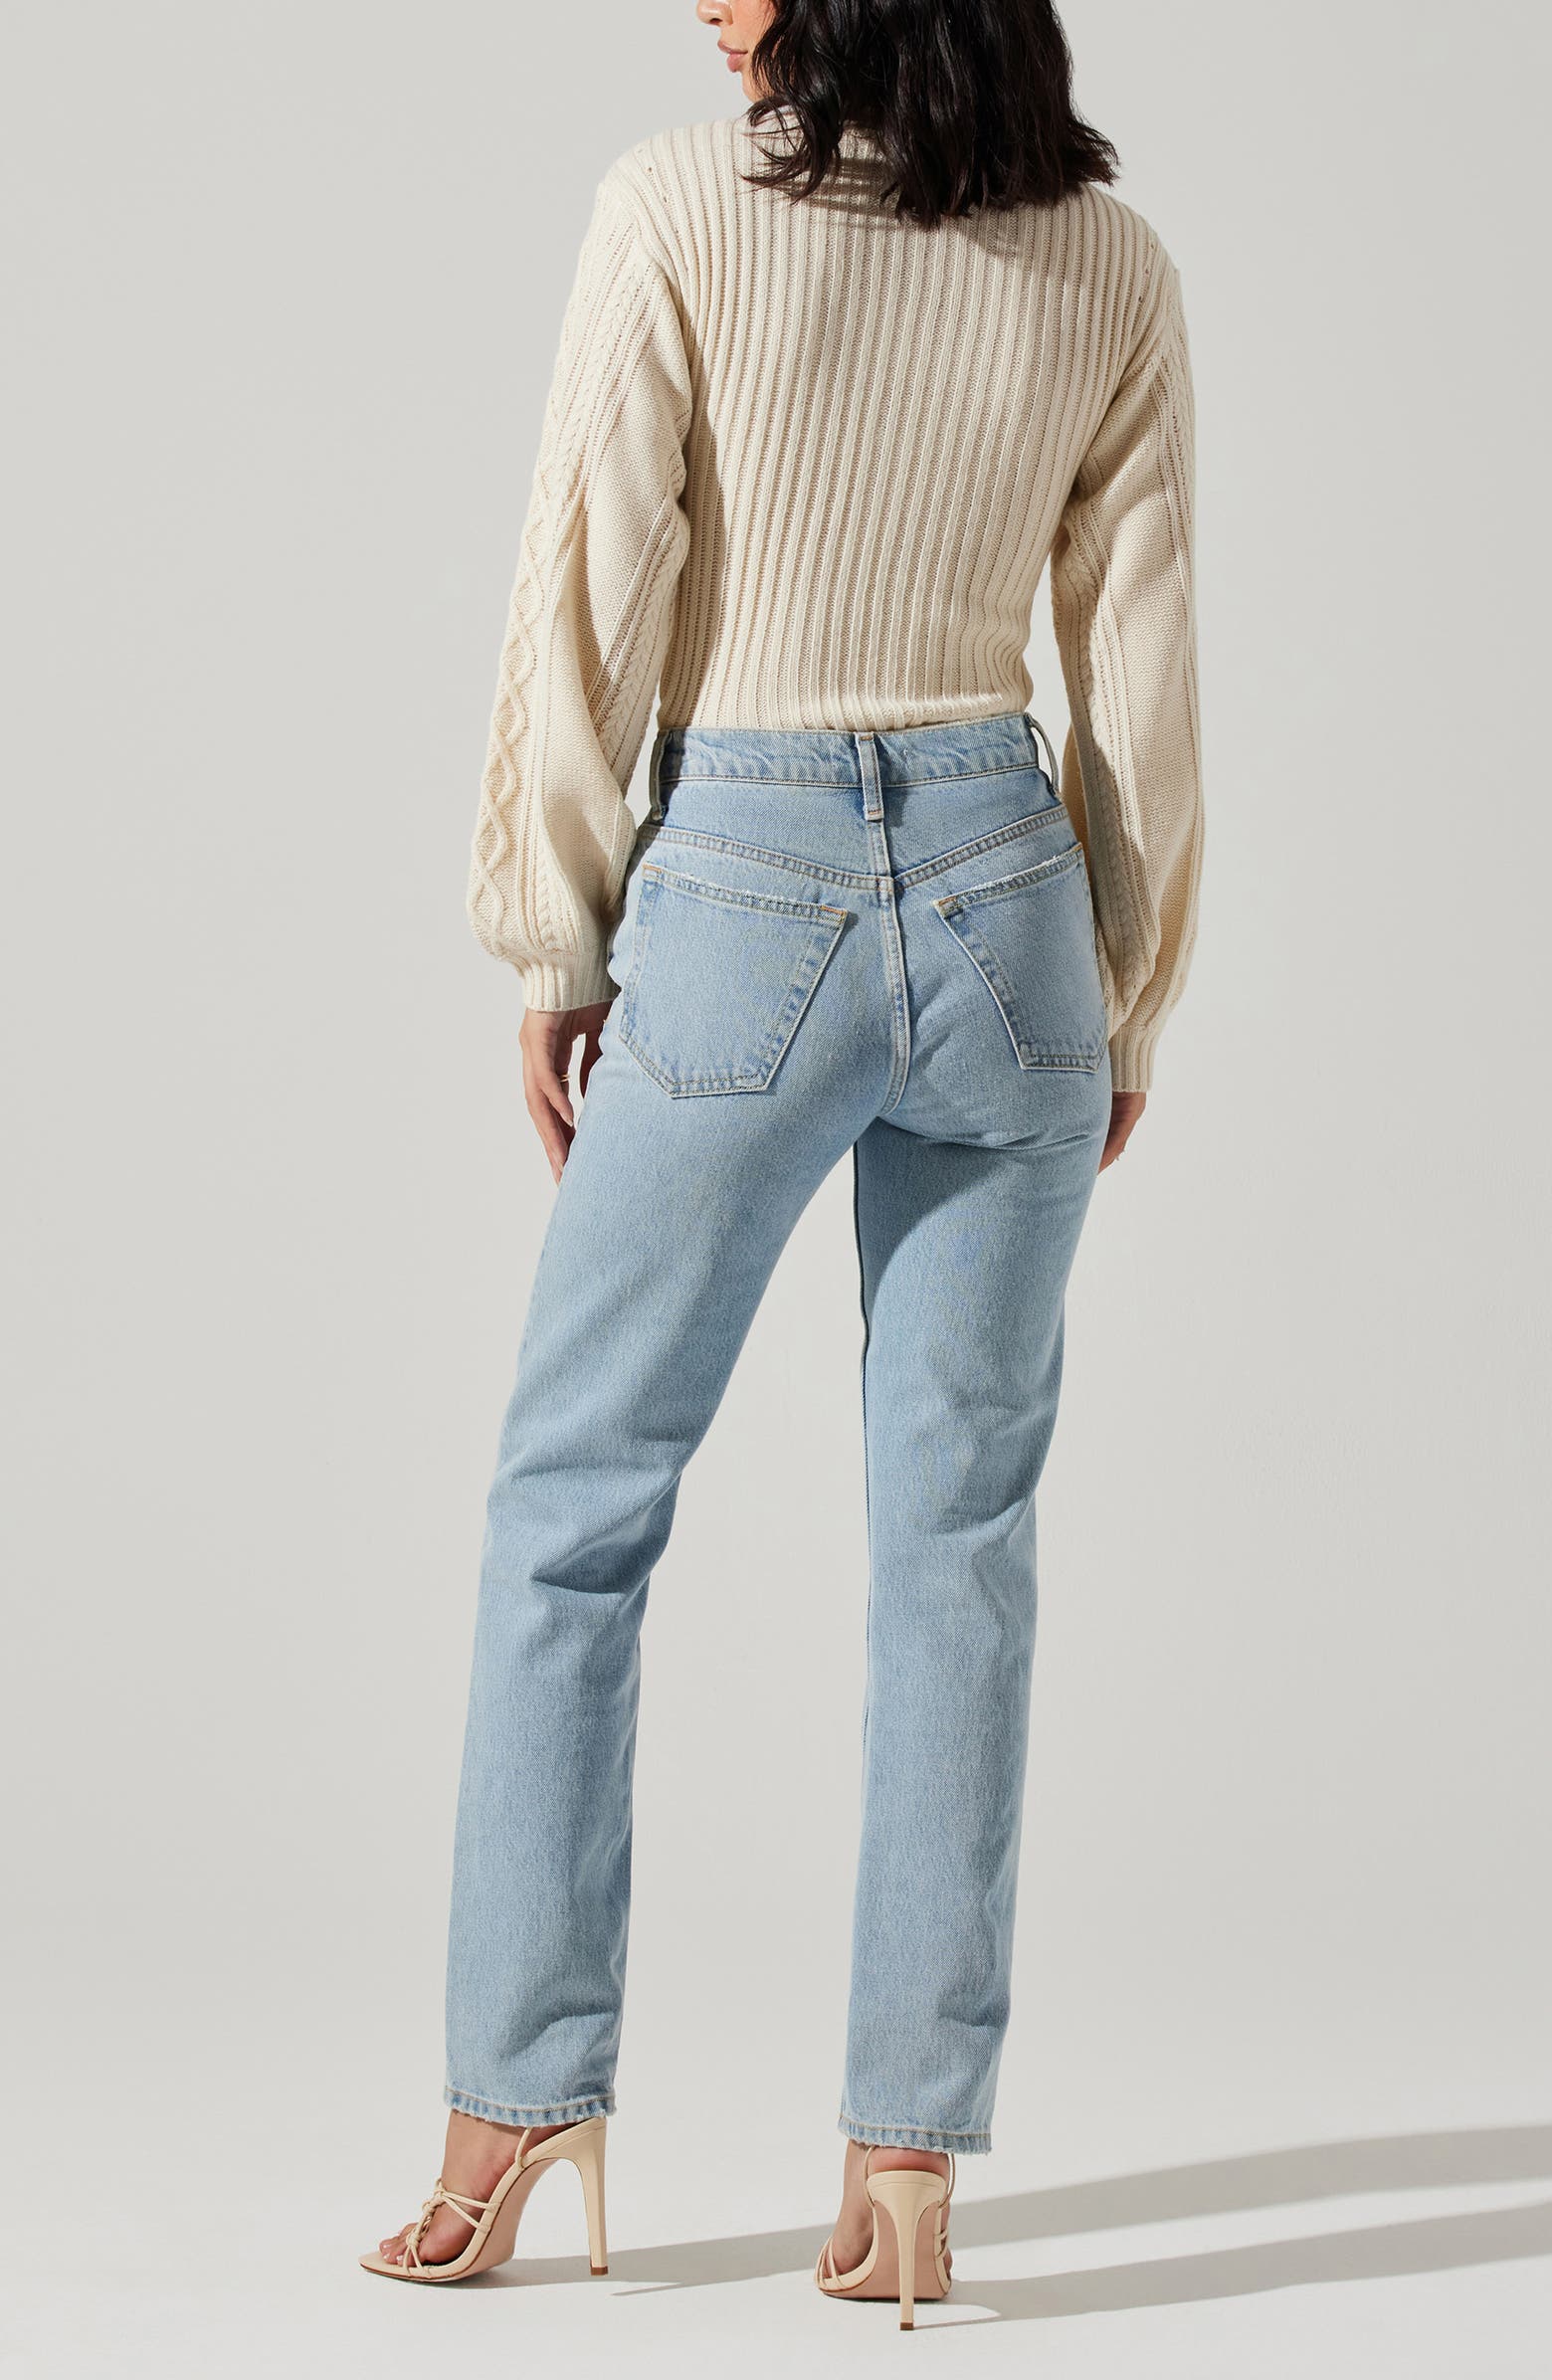 ASTR the Label Cutout Mock Neck Sweater | Nordstrom